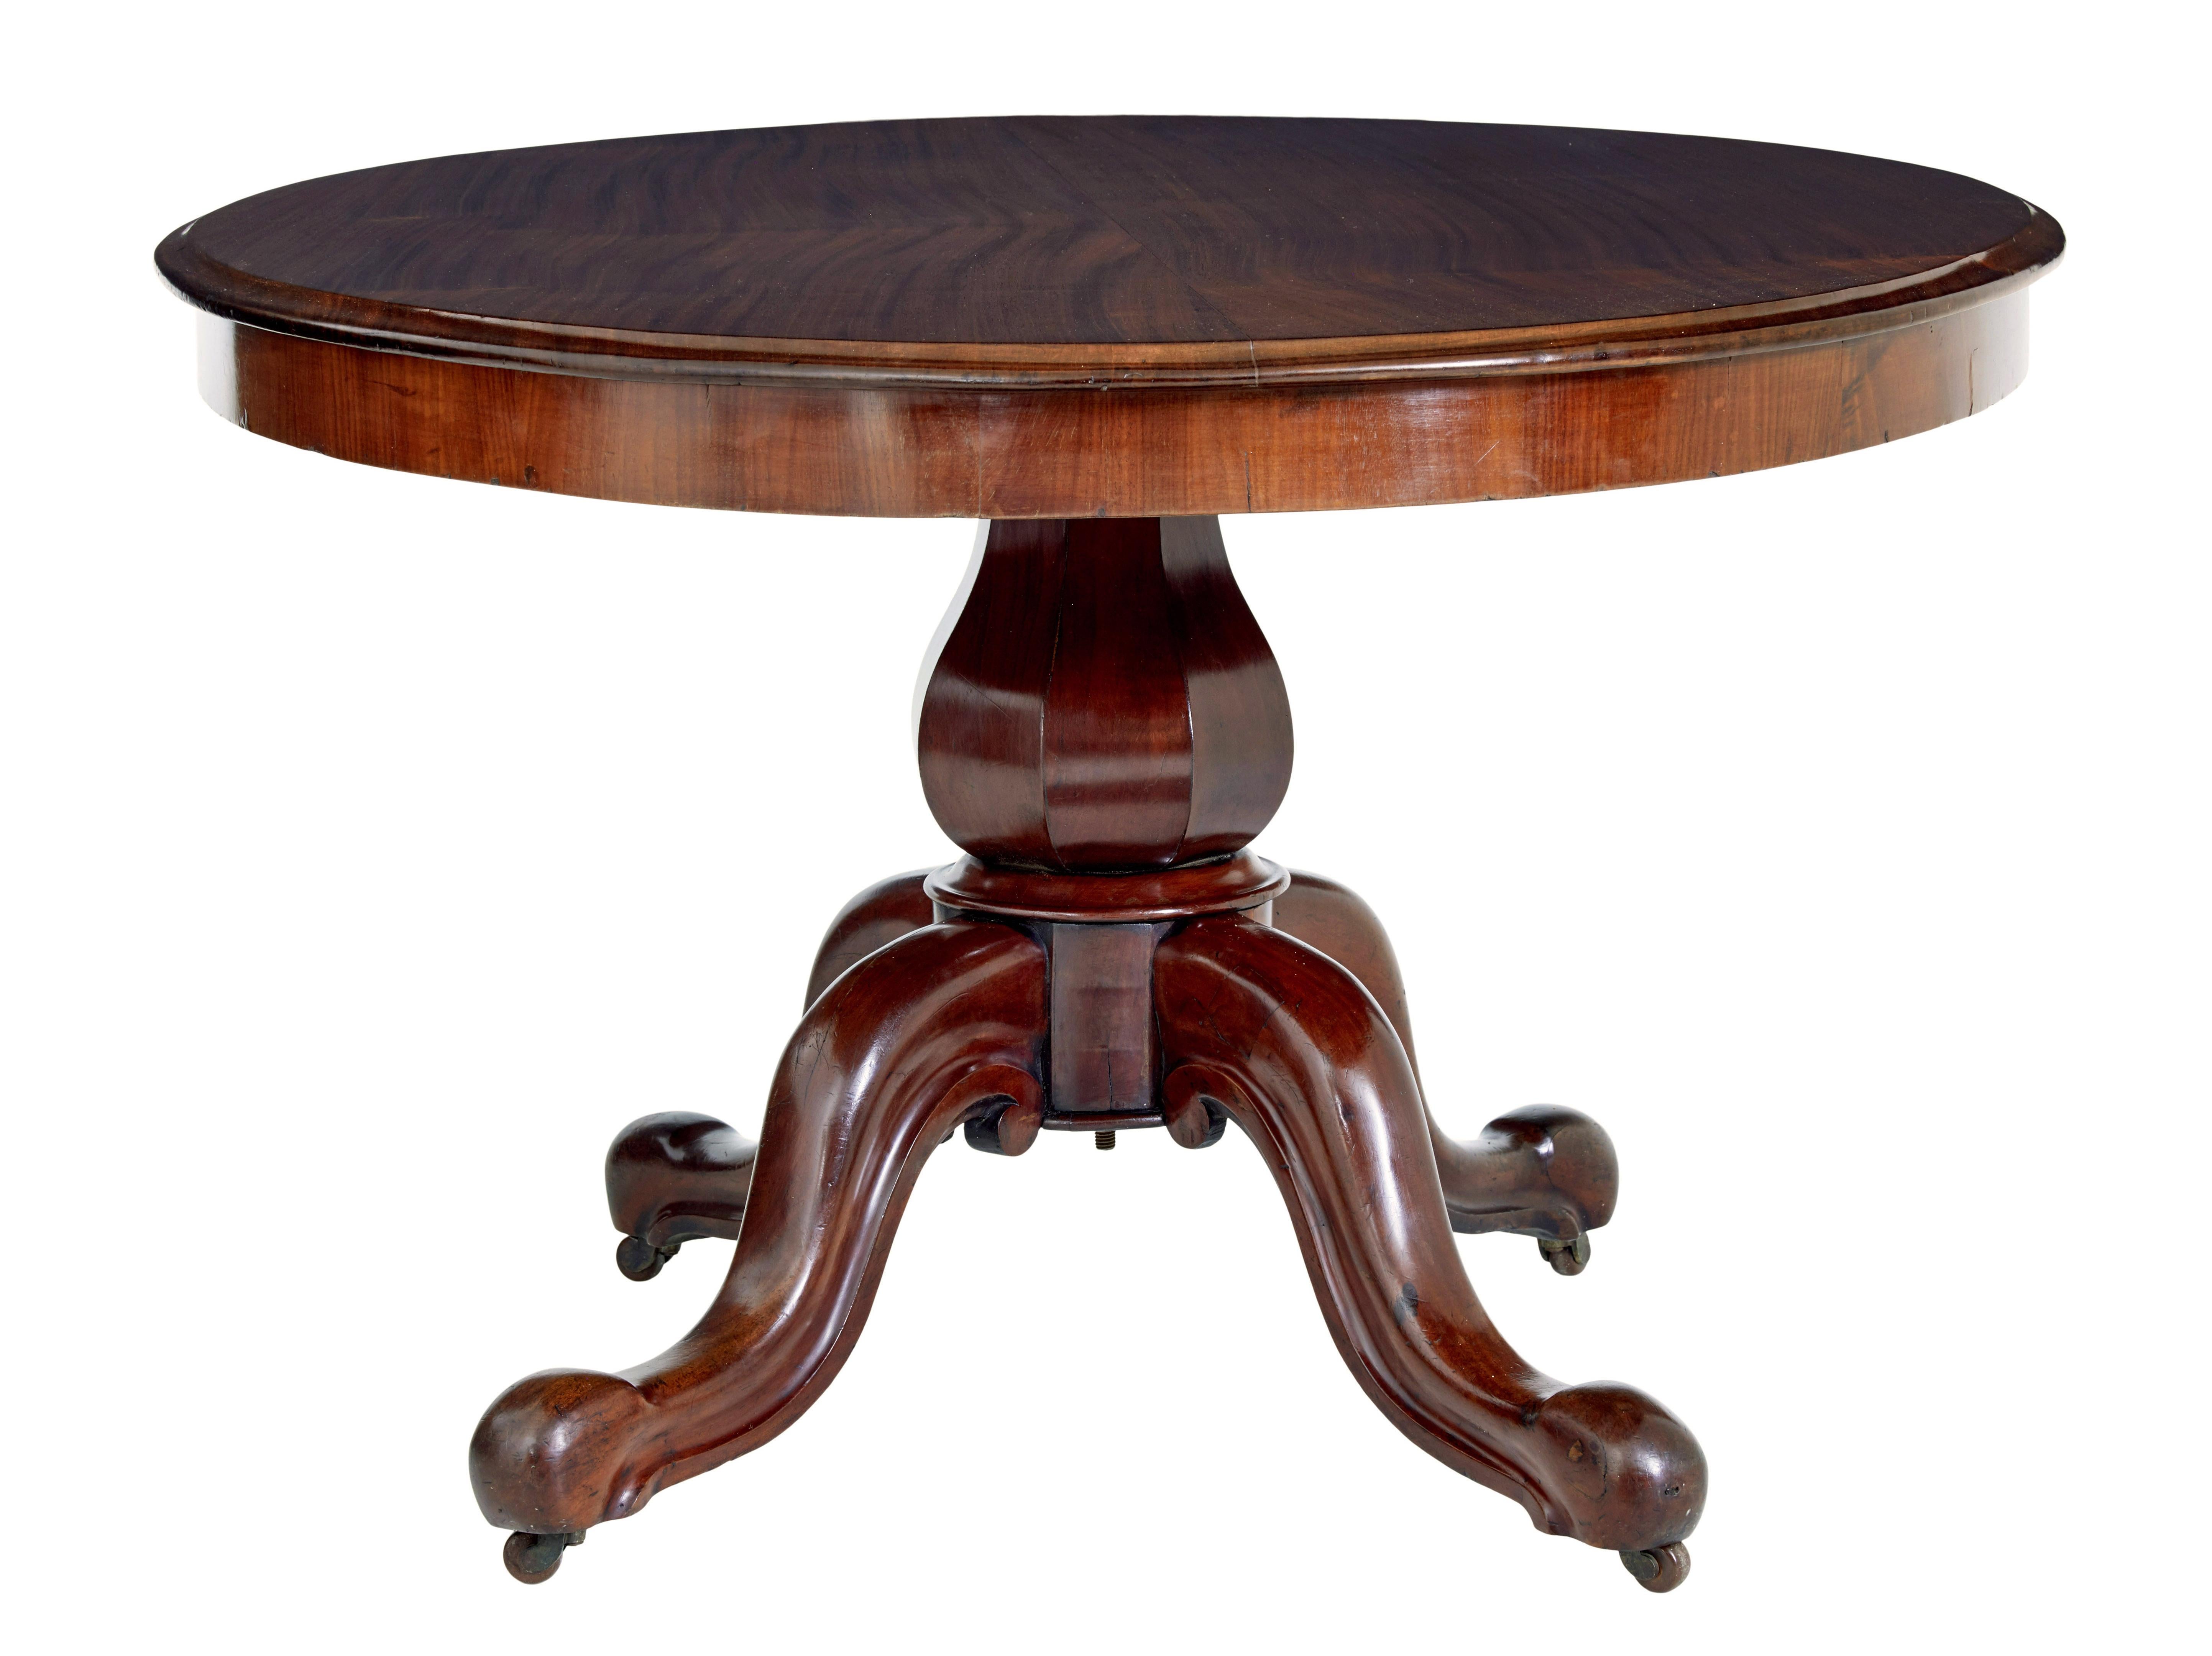 Victorian 19th century mahogany breakfast table circa 1870.

Good quality high victorian breakfast table, which could equally serve well as a center, sofa or occasional dining table.

Solid 2 piece mahogany top, maintaining a good patina and shaped